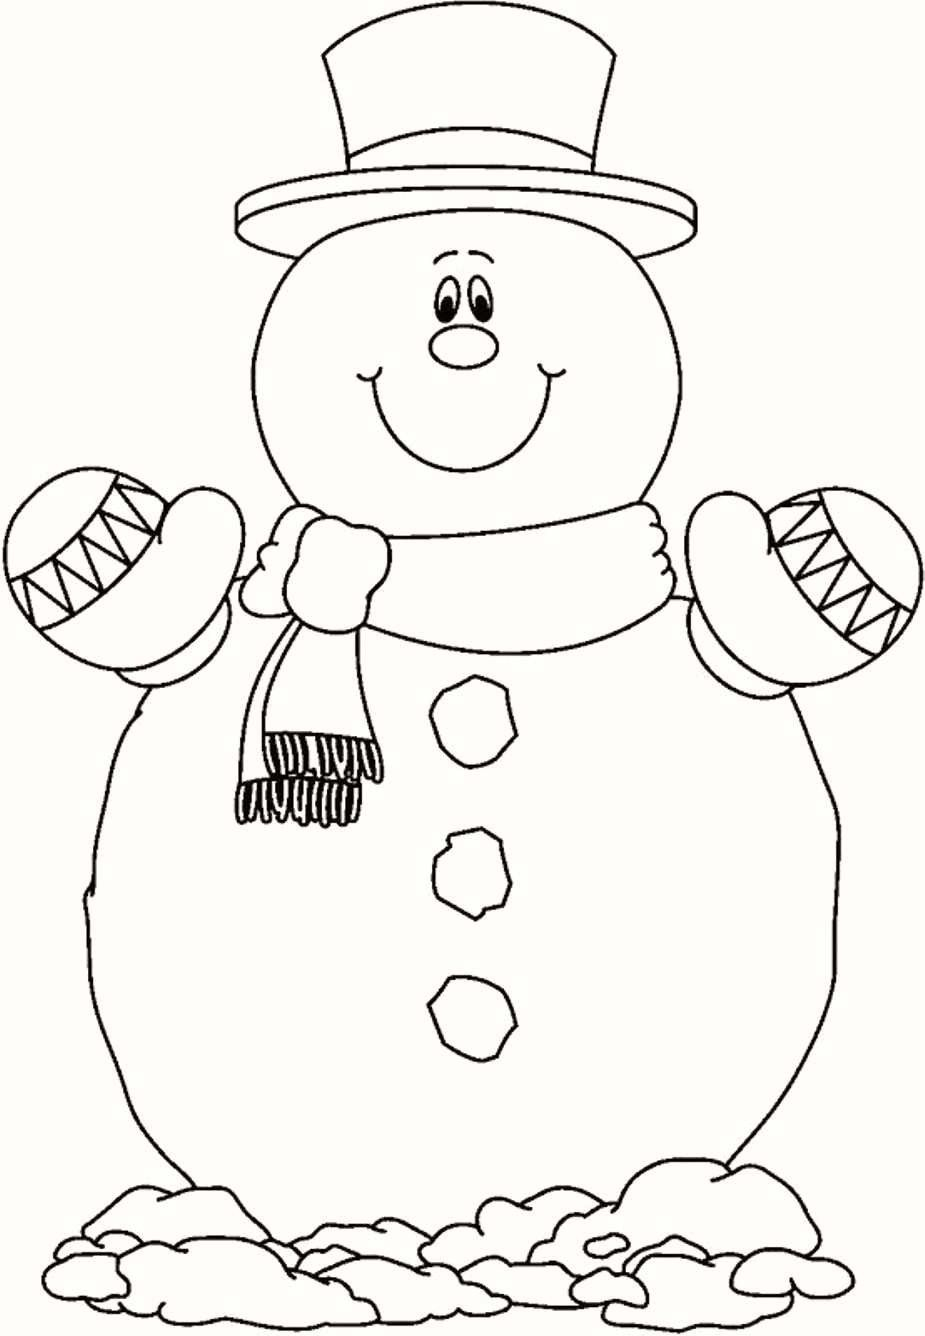 Coloring Pages Of Snowmen Coloring Pages Frosty The Snowman Coloring Book Pages Disney